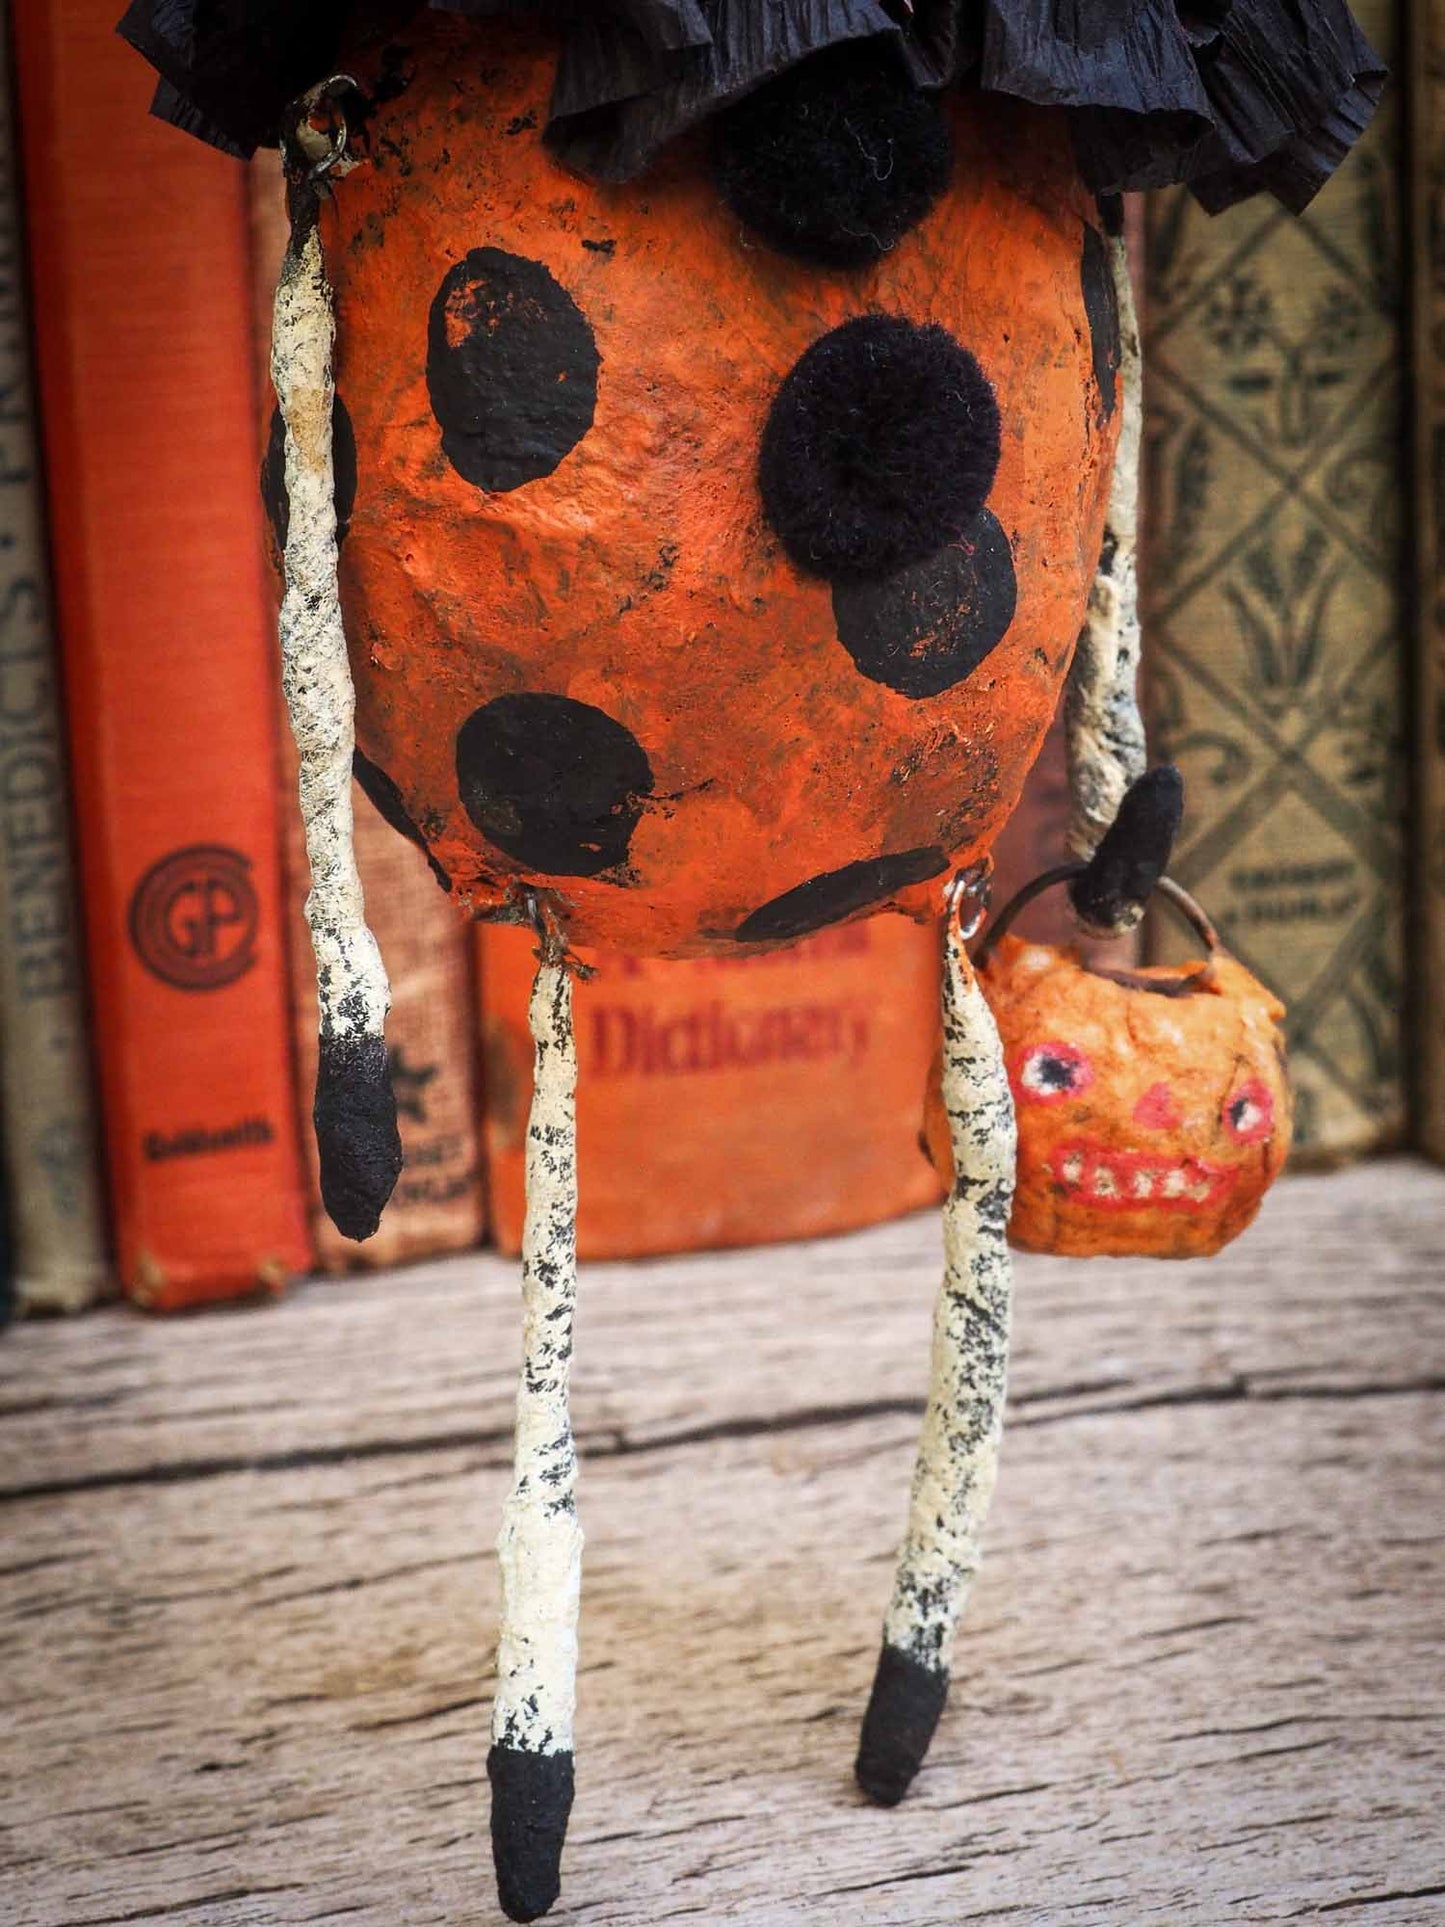 A Halloween carol is Danita's version of the tale of the three ghosts in A Christmas carol. Danita made handmade art dolls in spun cotton using ghouls, jack-o-lanterns, skeleton, witches, ghosts and more to create a visually inspiring set collection of Handmade dolls to create a beautiful Halloween story and home decor decoration.